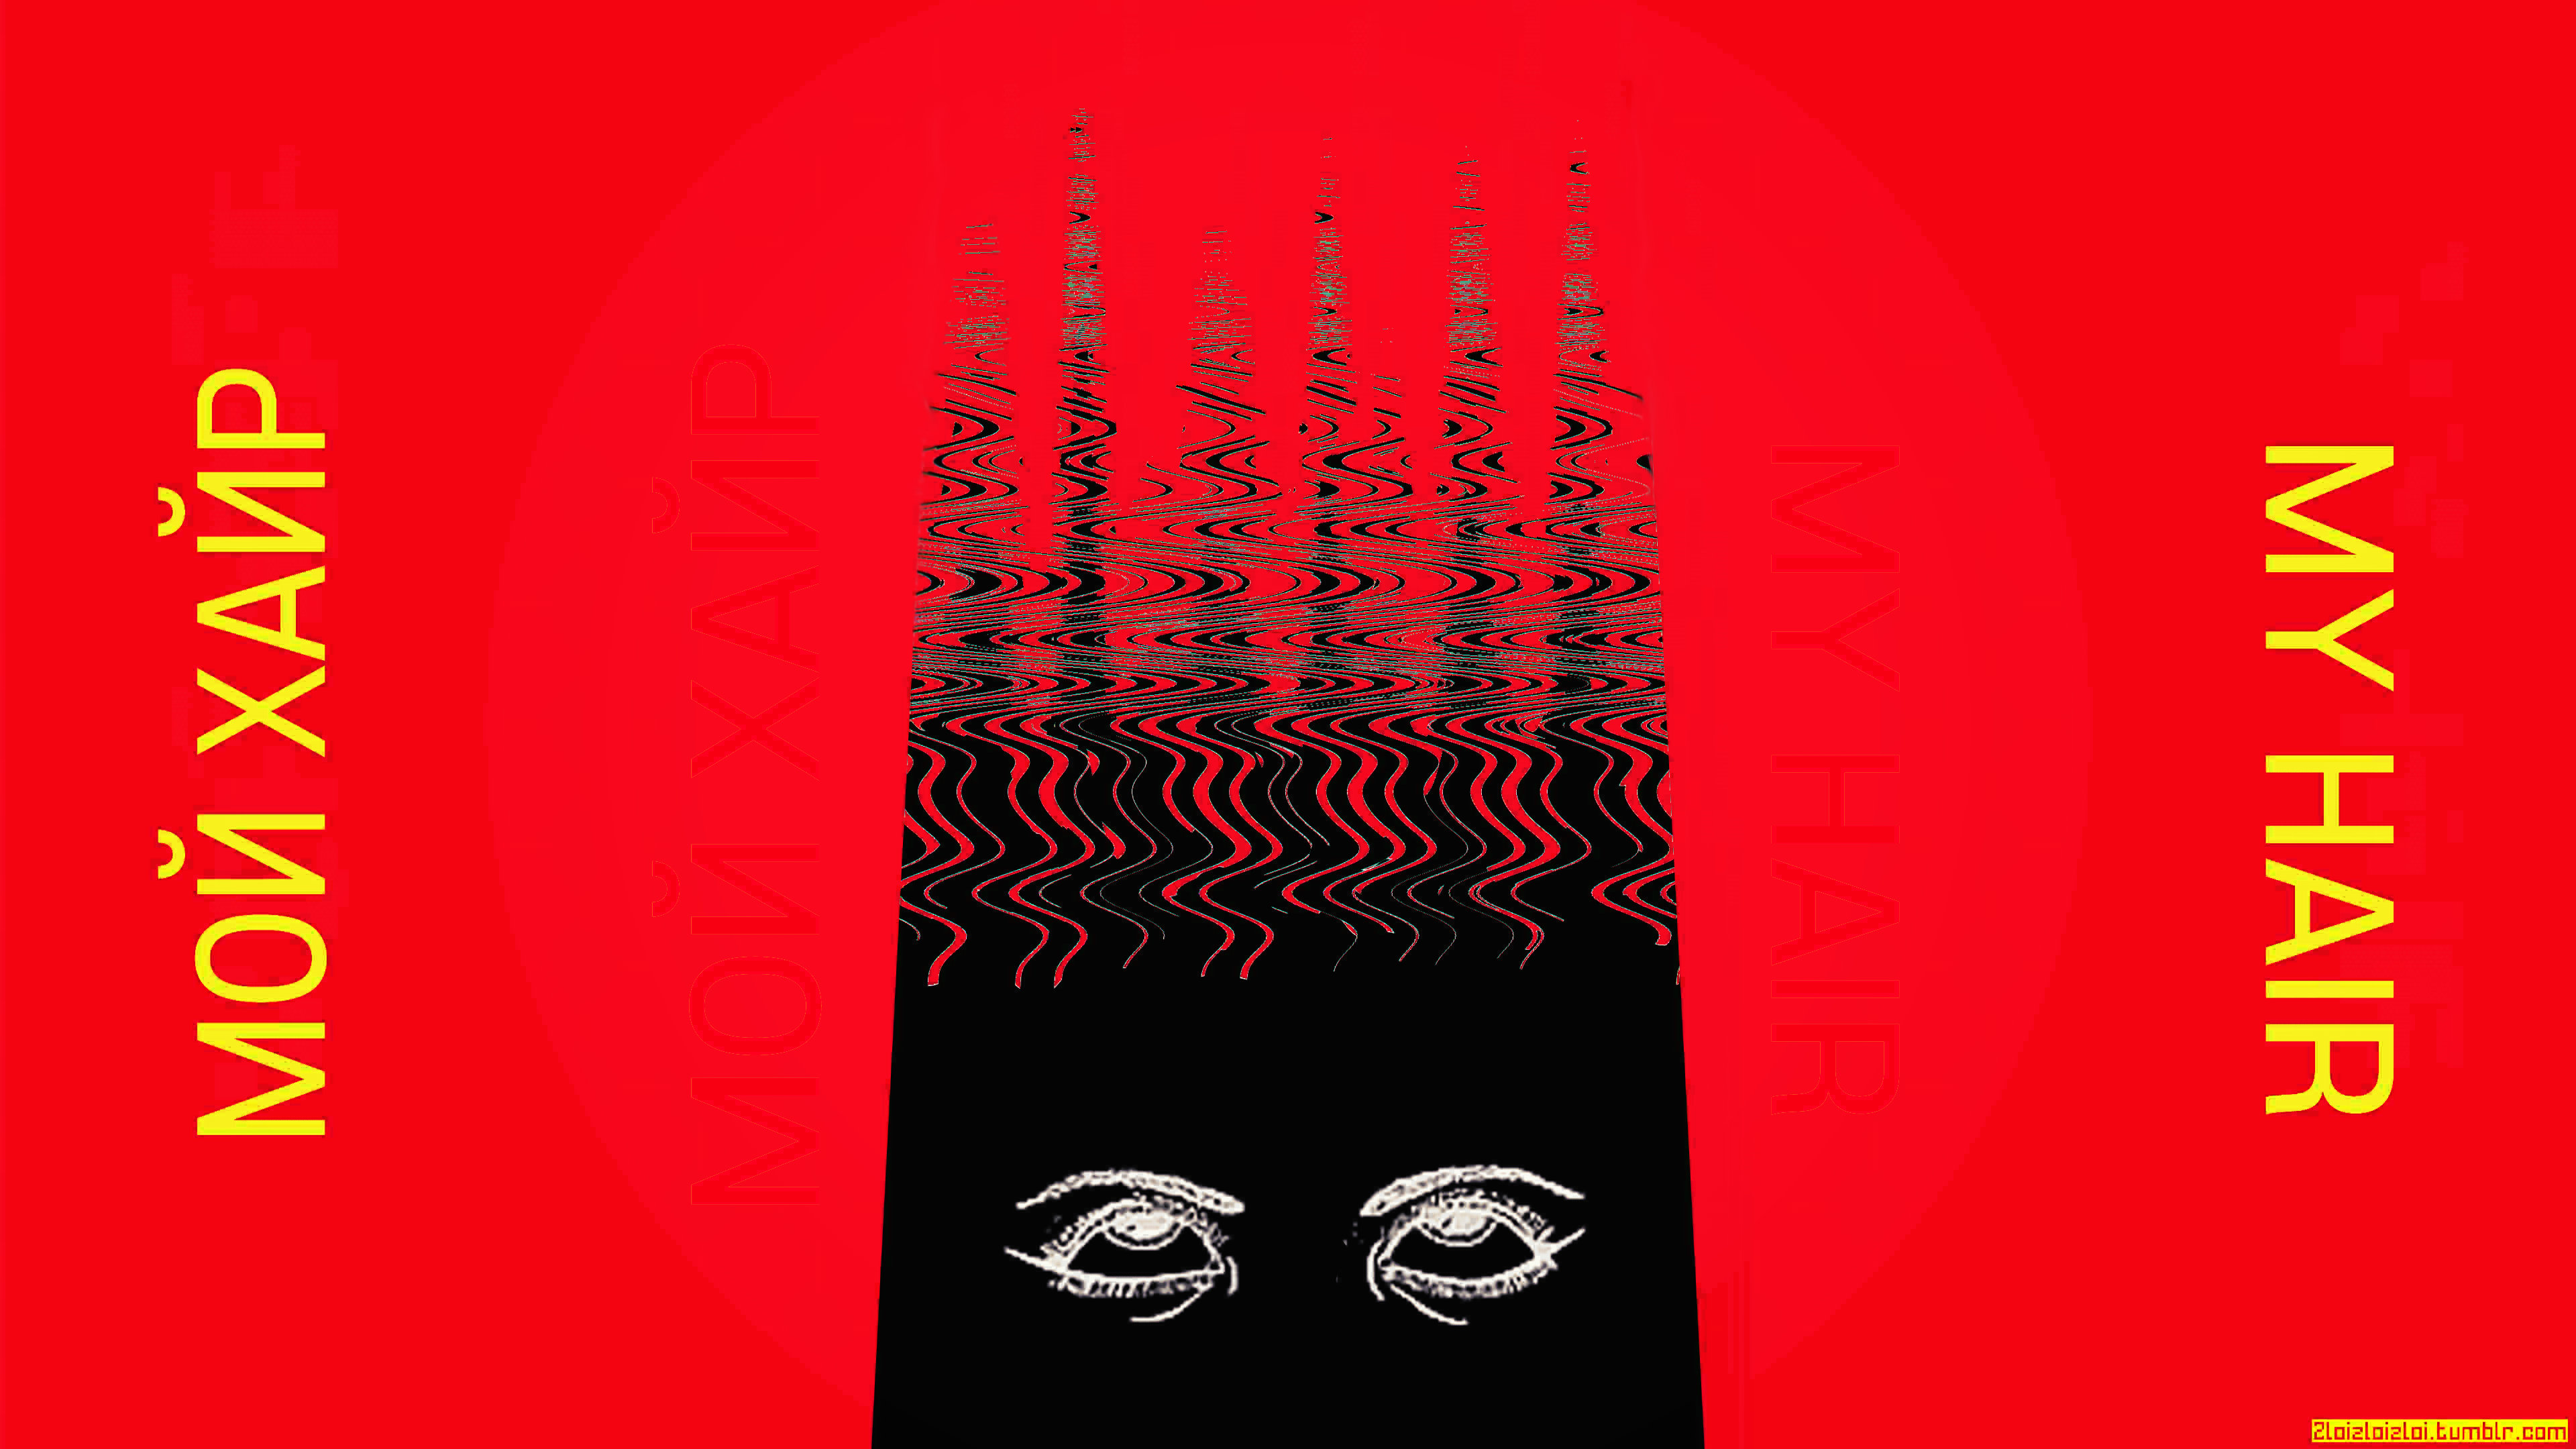 General 3840x2160 glitch art abstract face minimalism red digital art simple background text Zloizloizloi watermarked